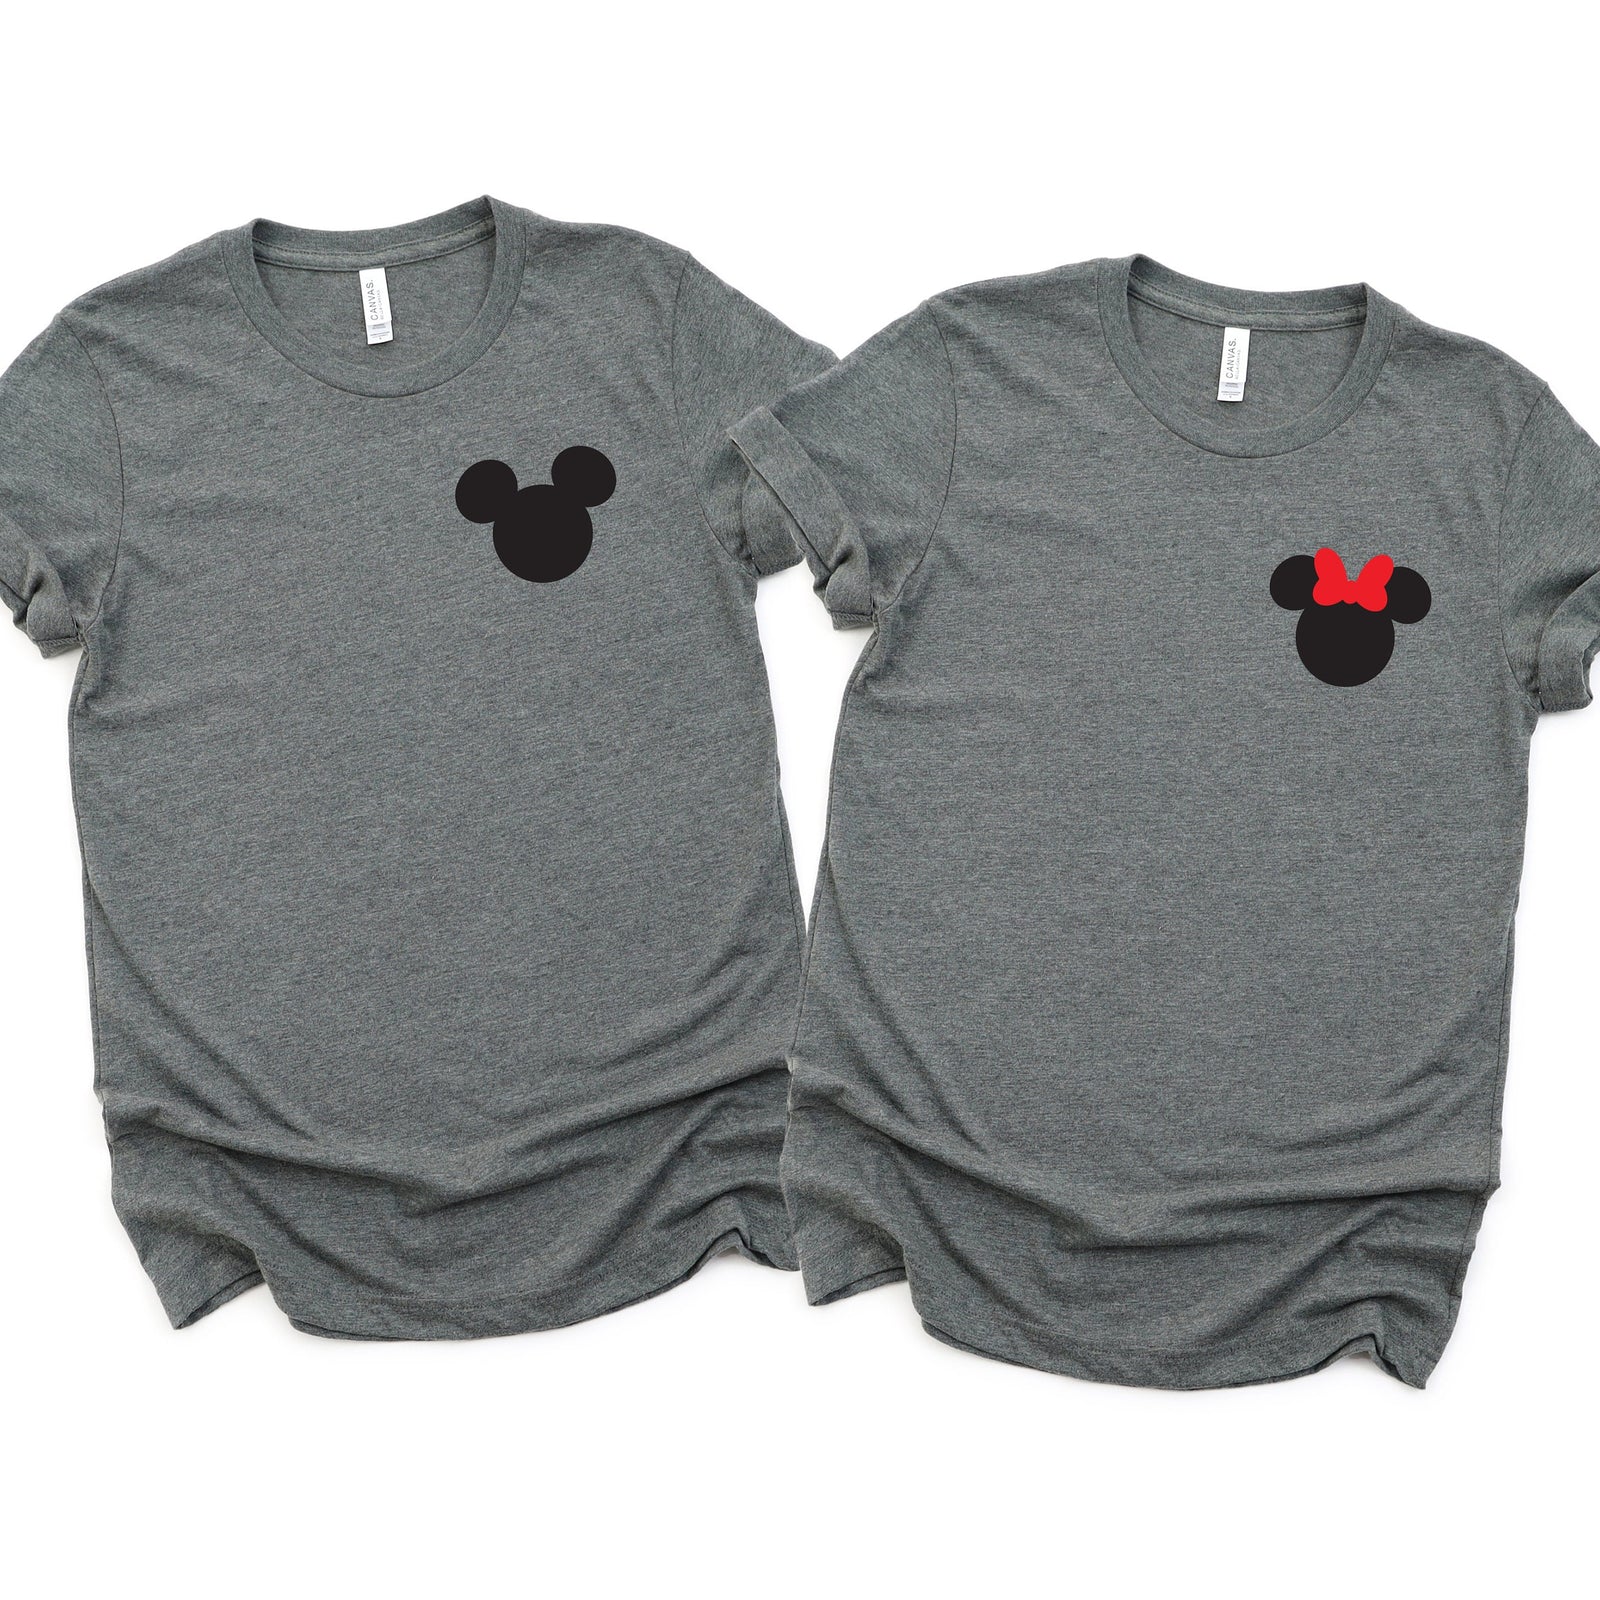 Mickey and Minnie Mouse Custom Matching Disney Shirts - Disney Couples - Mickey and Minnie Left Chest Pocket Size